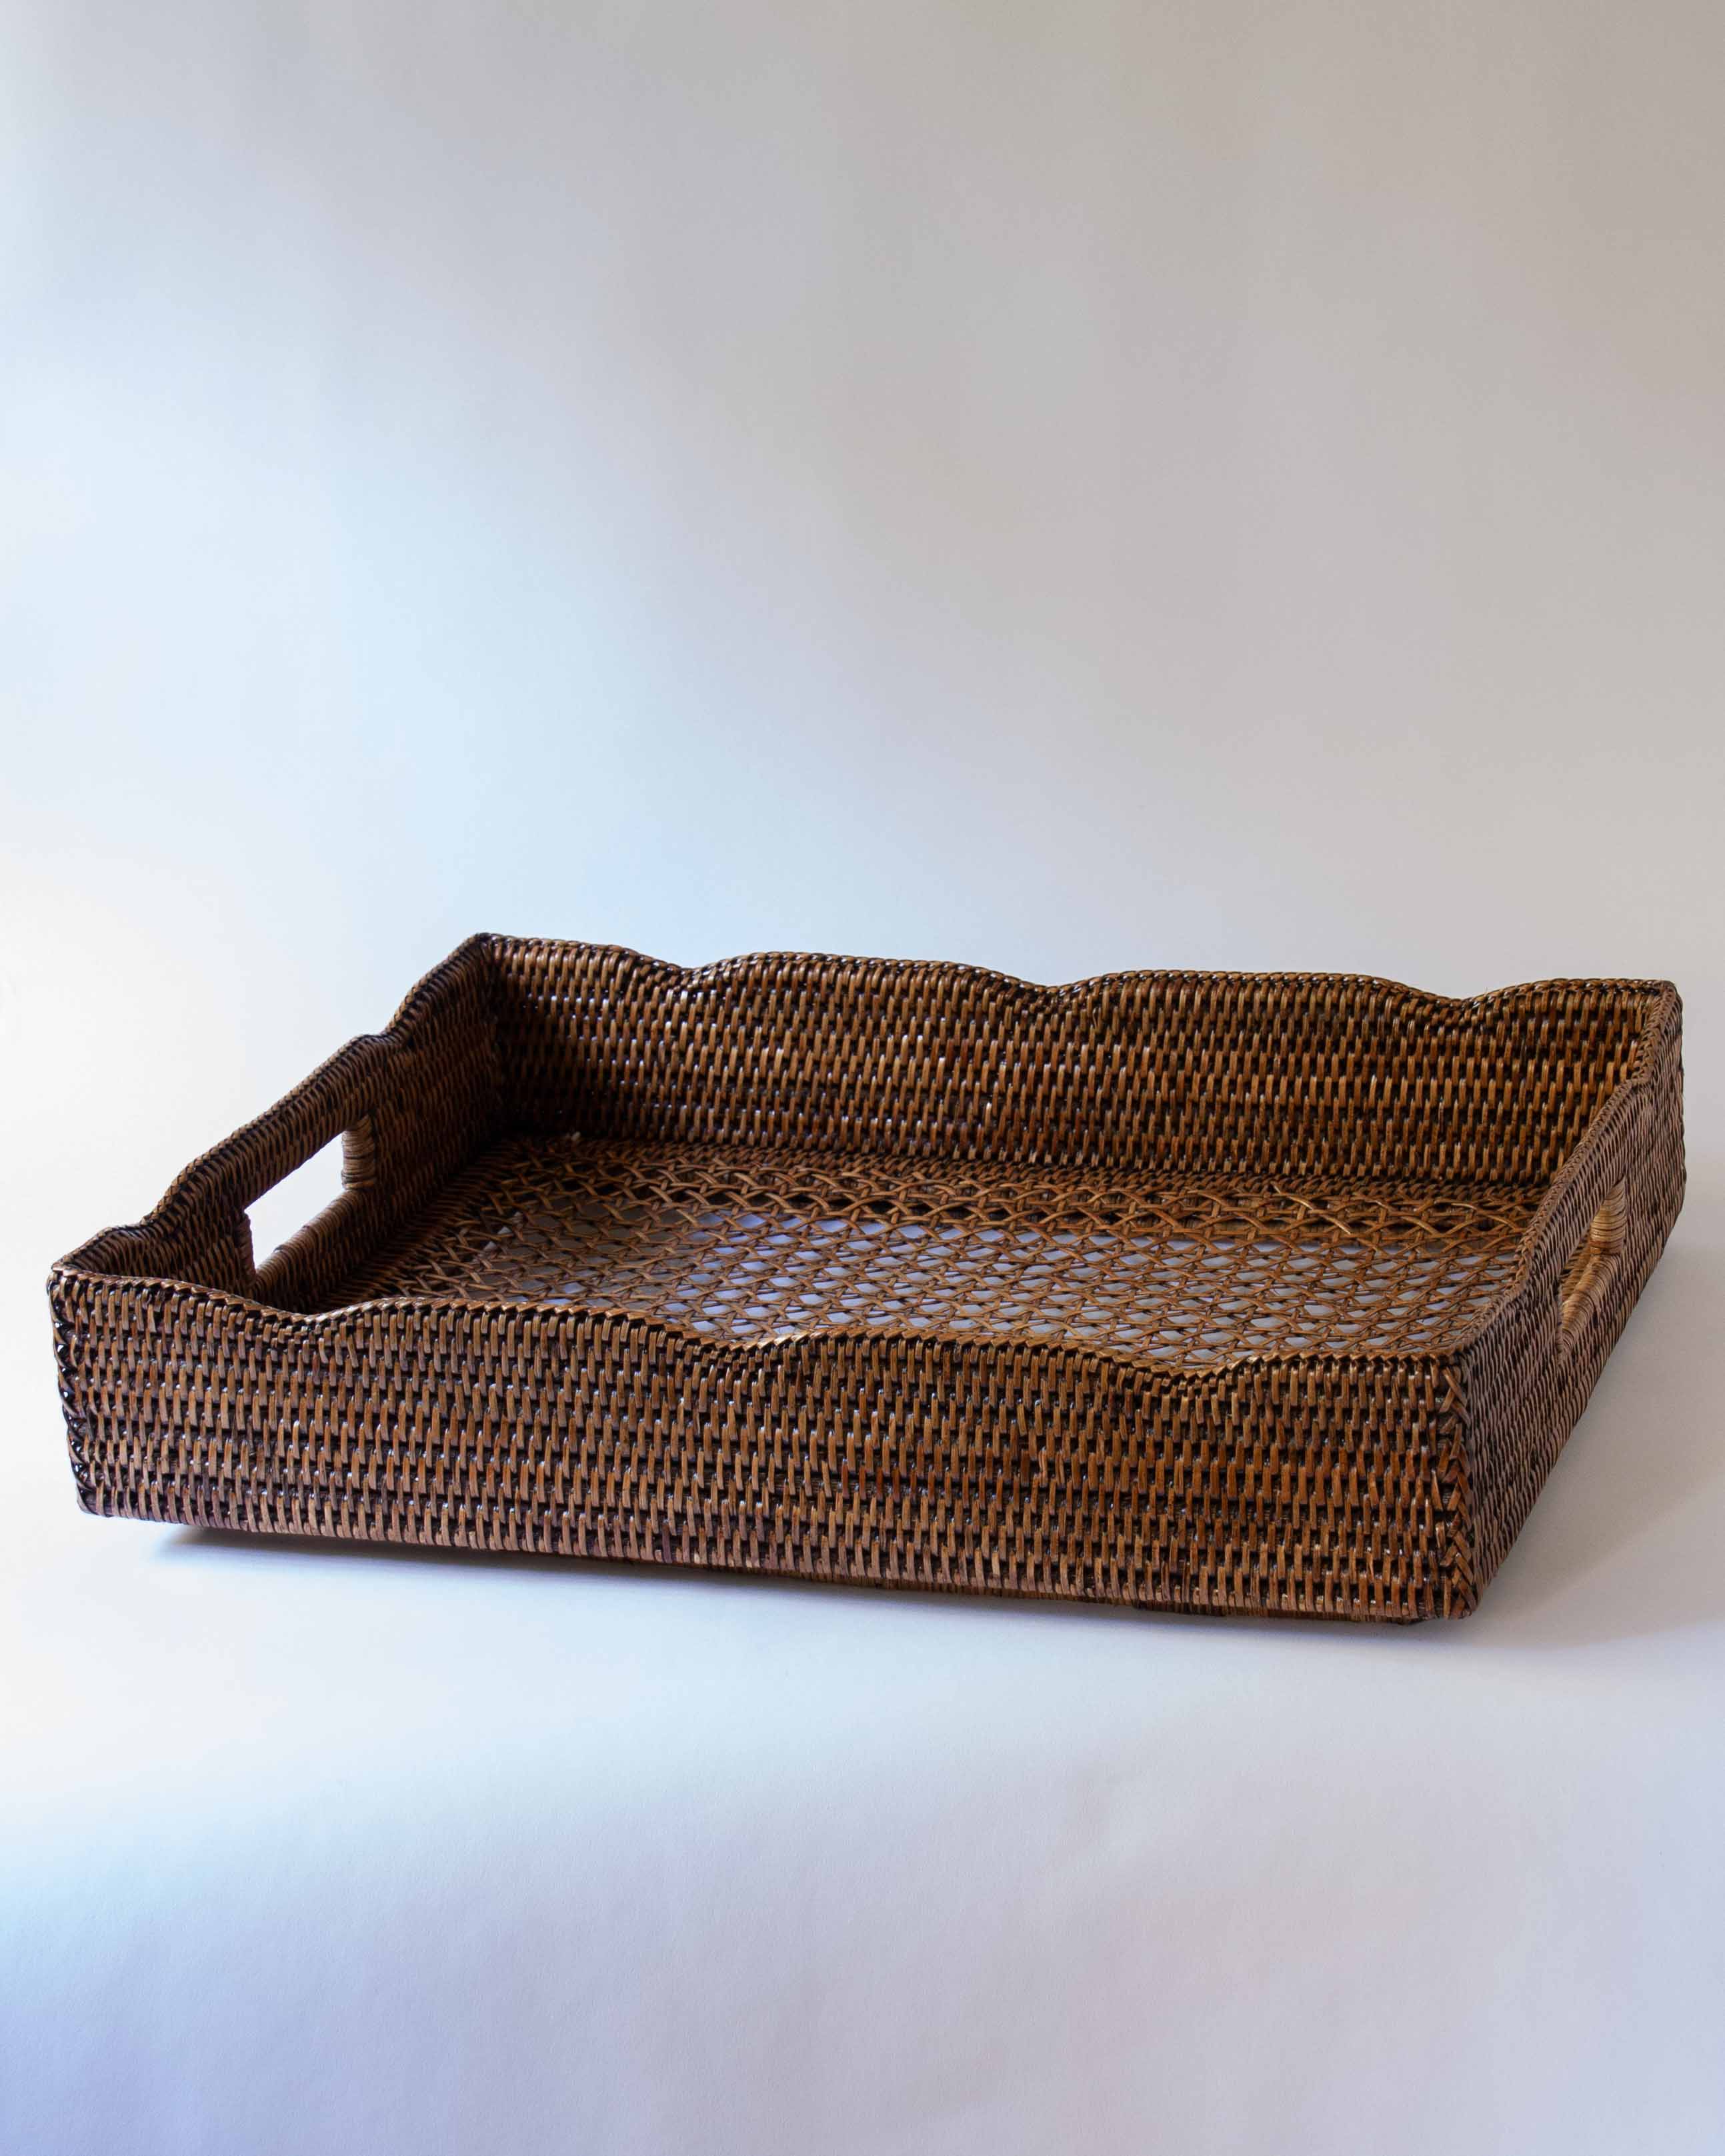 Kendall Scalloped Rattan Tray - Large